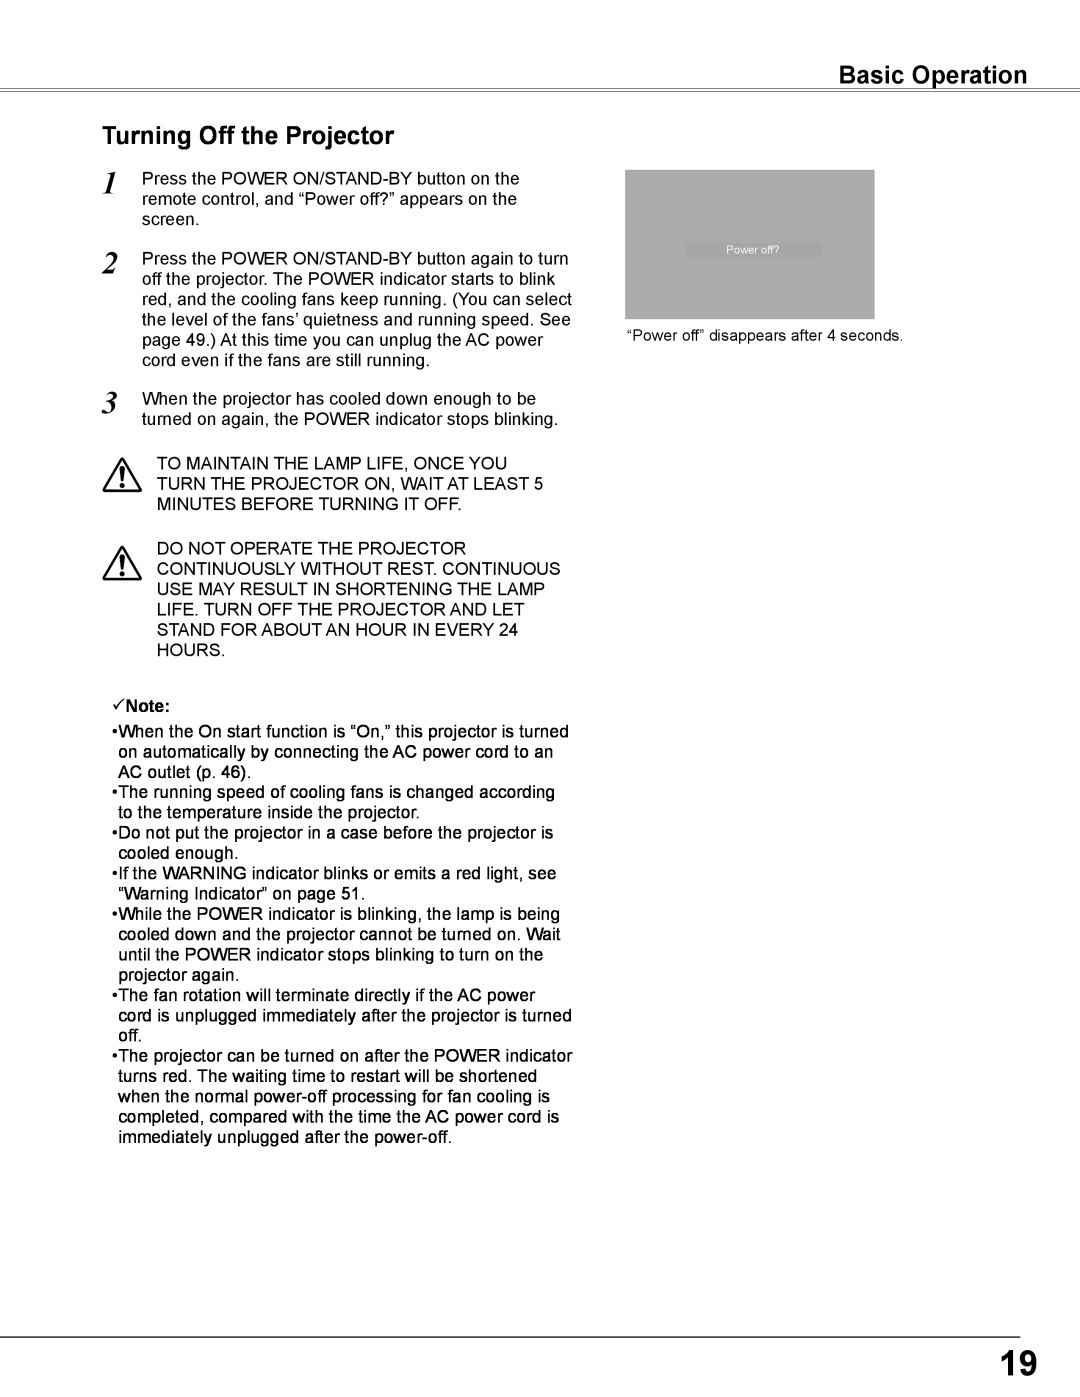 Sanyo PLC-WXE46 owner manual Basic Operation, Turning Off the Projector, Note 